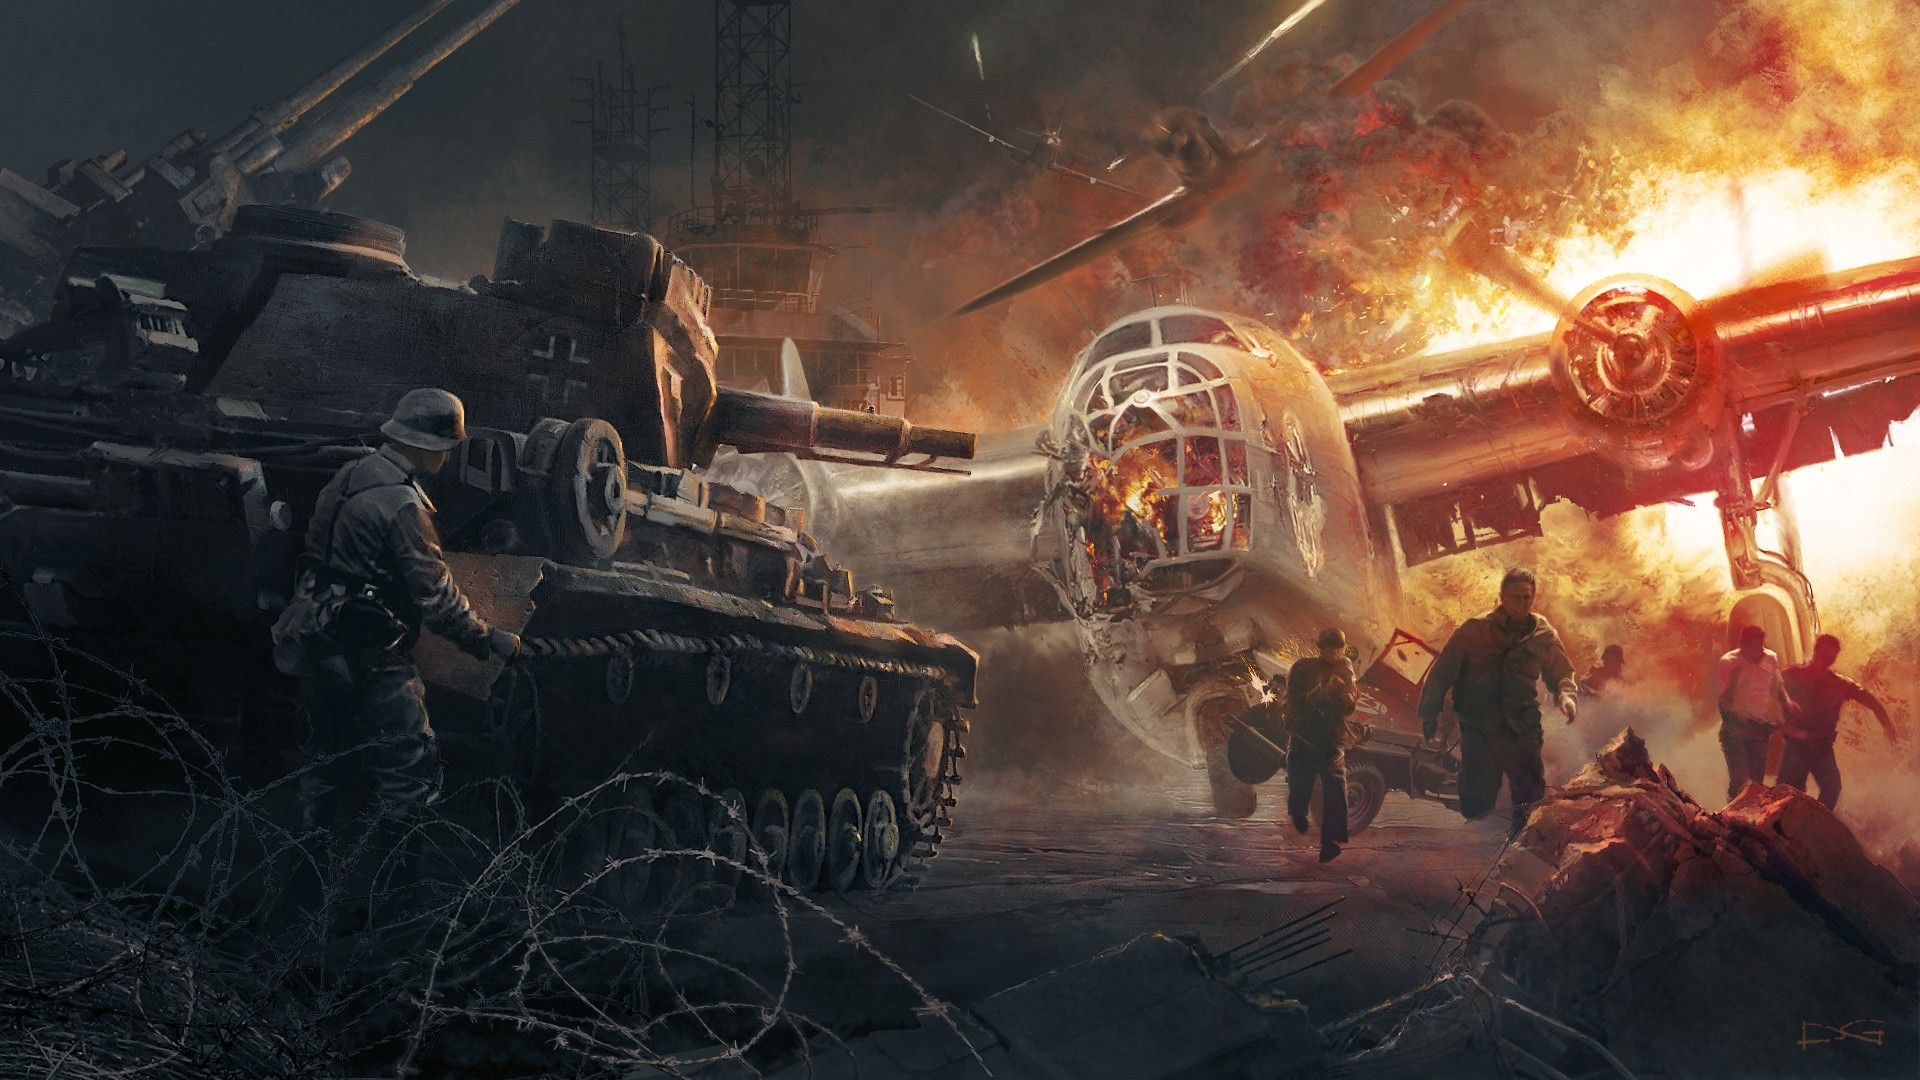 World War Tank Wallpaper For Android On 1080p HD